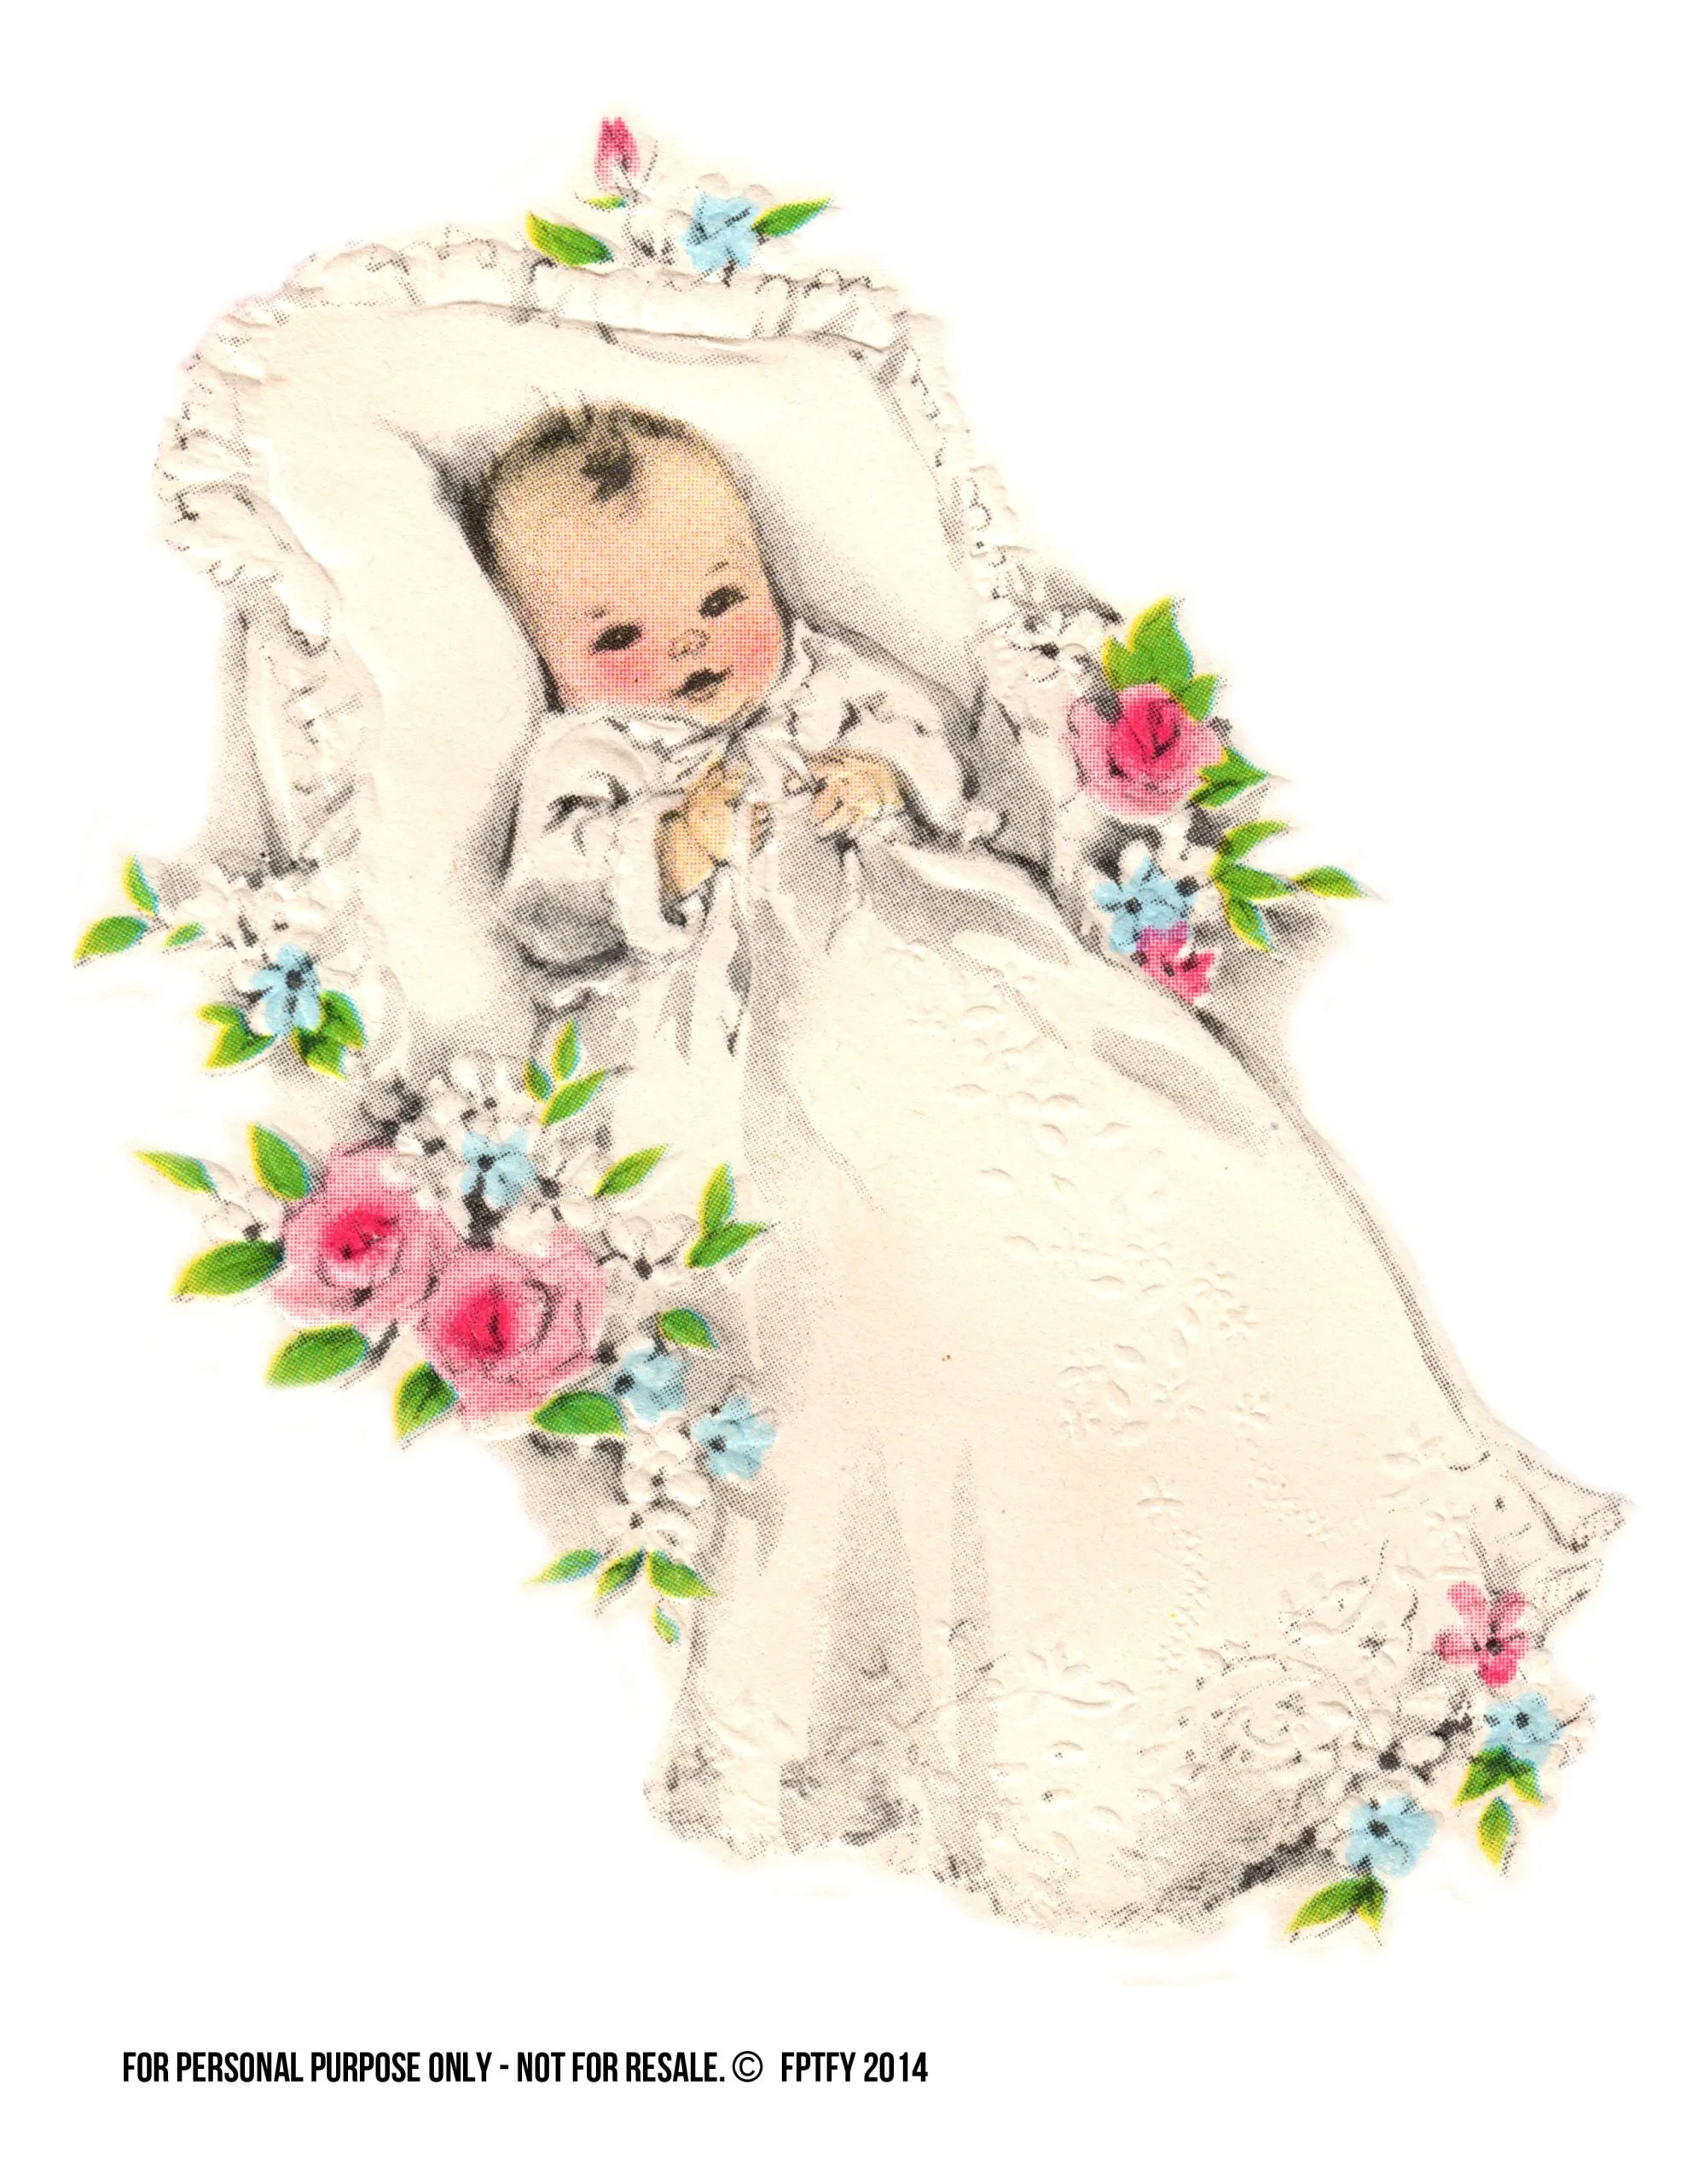 Free Large Vintage Baby Clip Art - Free Pretty Things For You